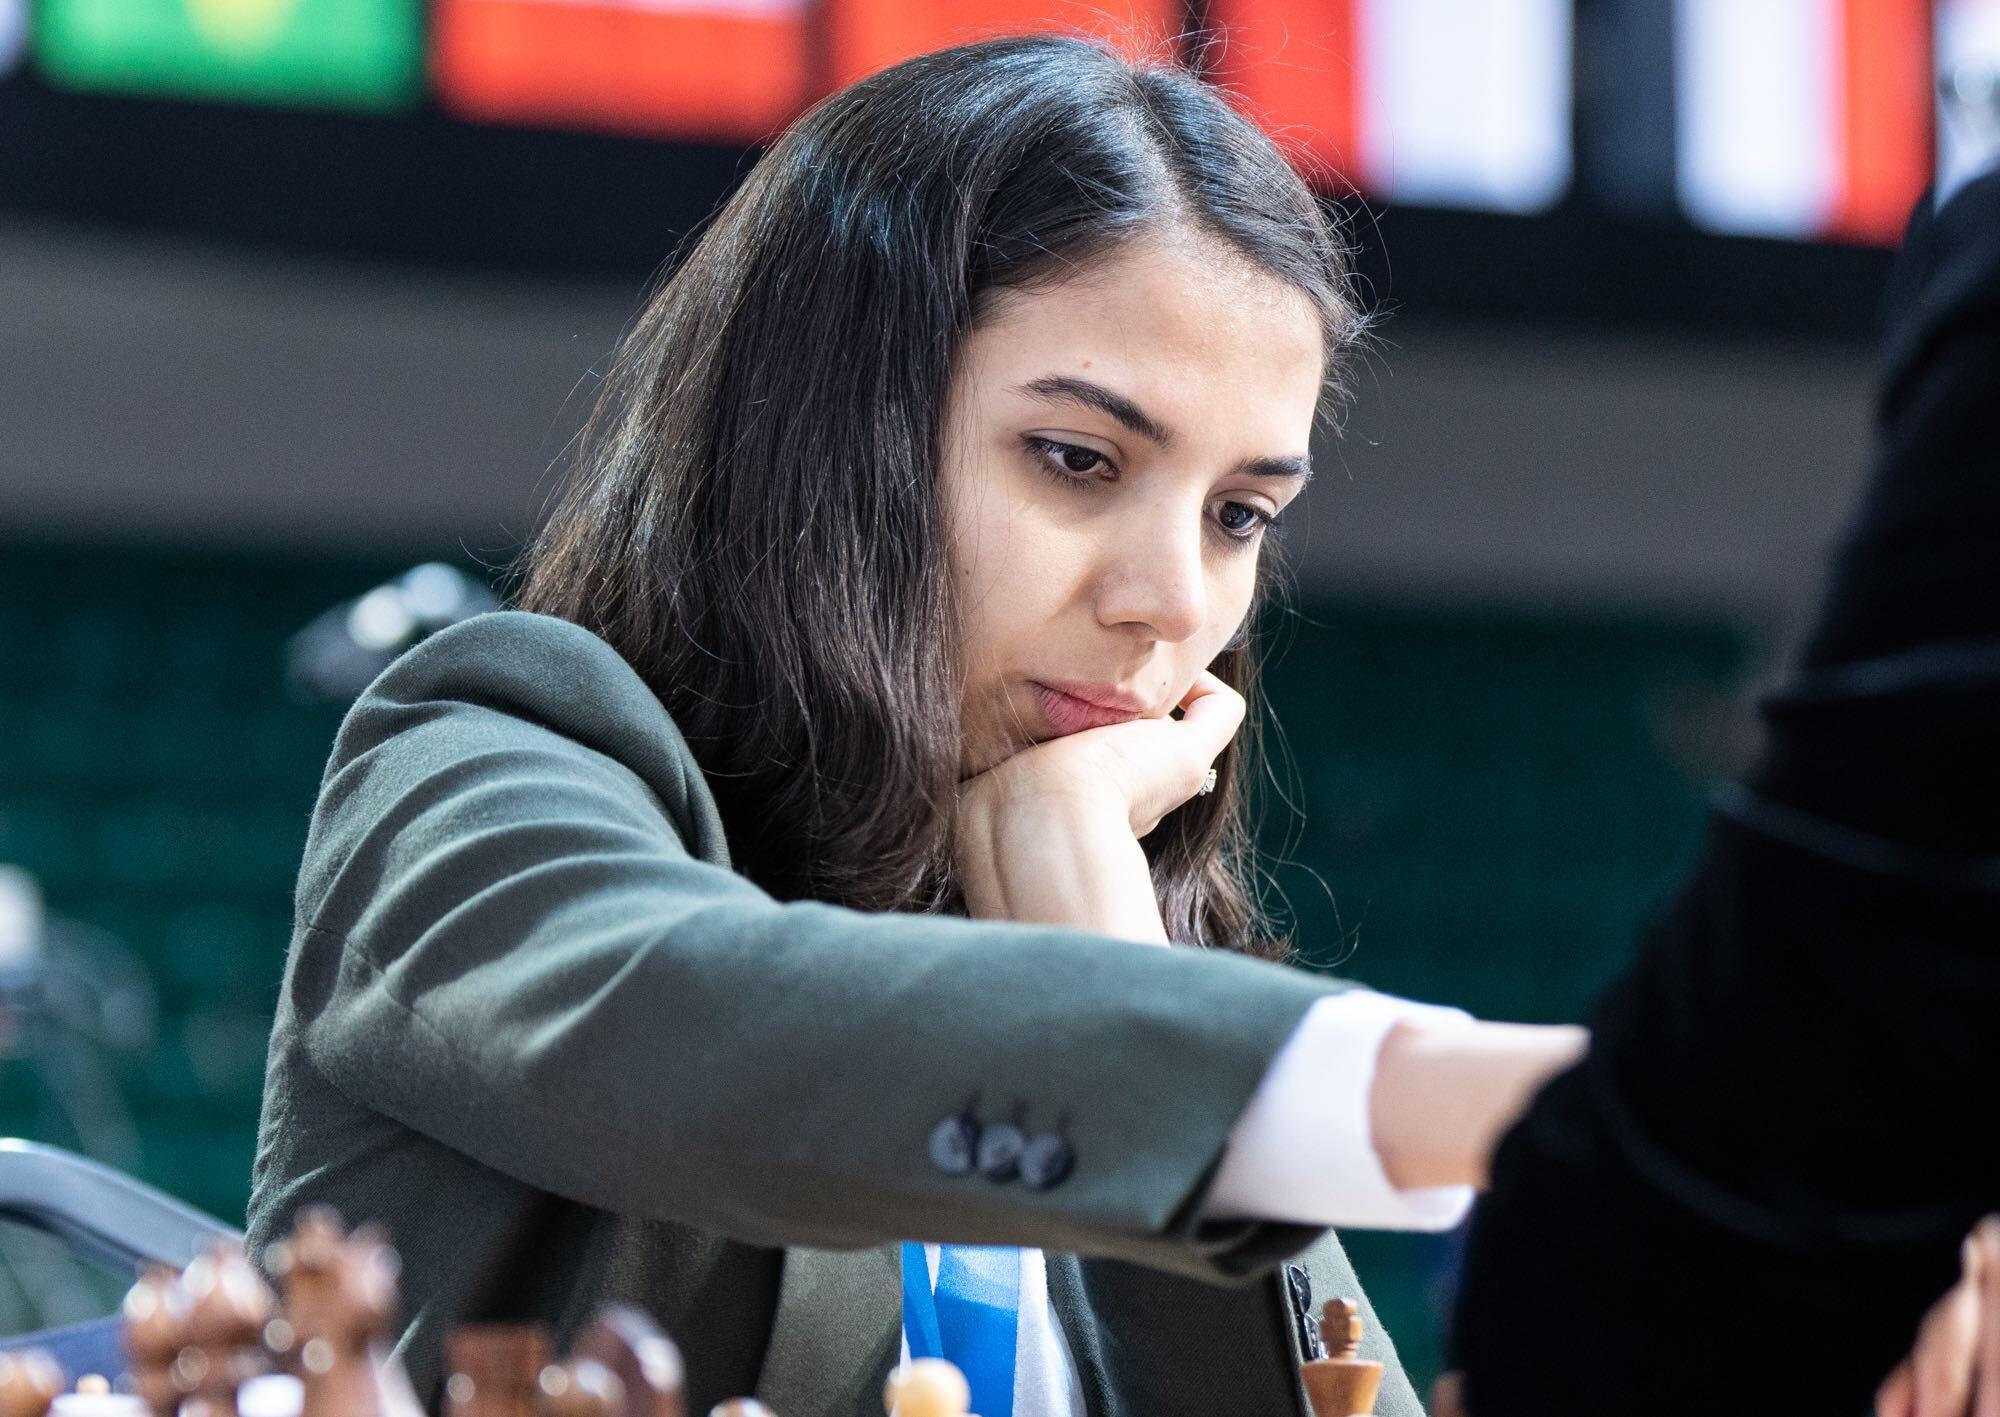 Iranian chess player 'moving to Spain' after competing without headscarf, Iran